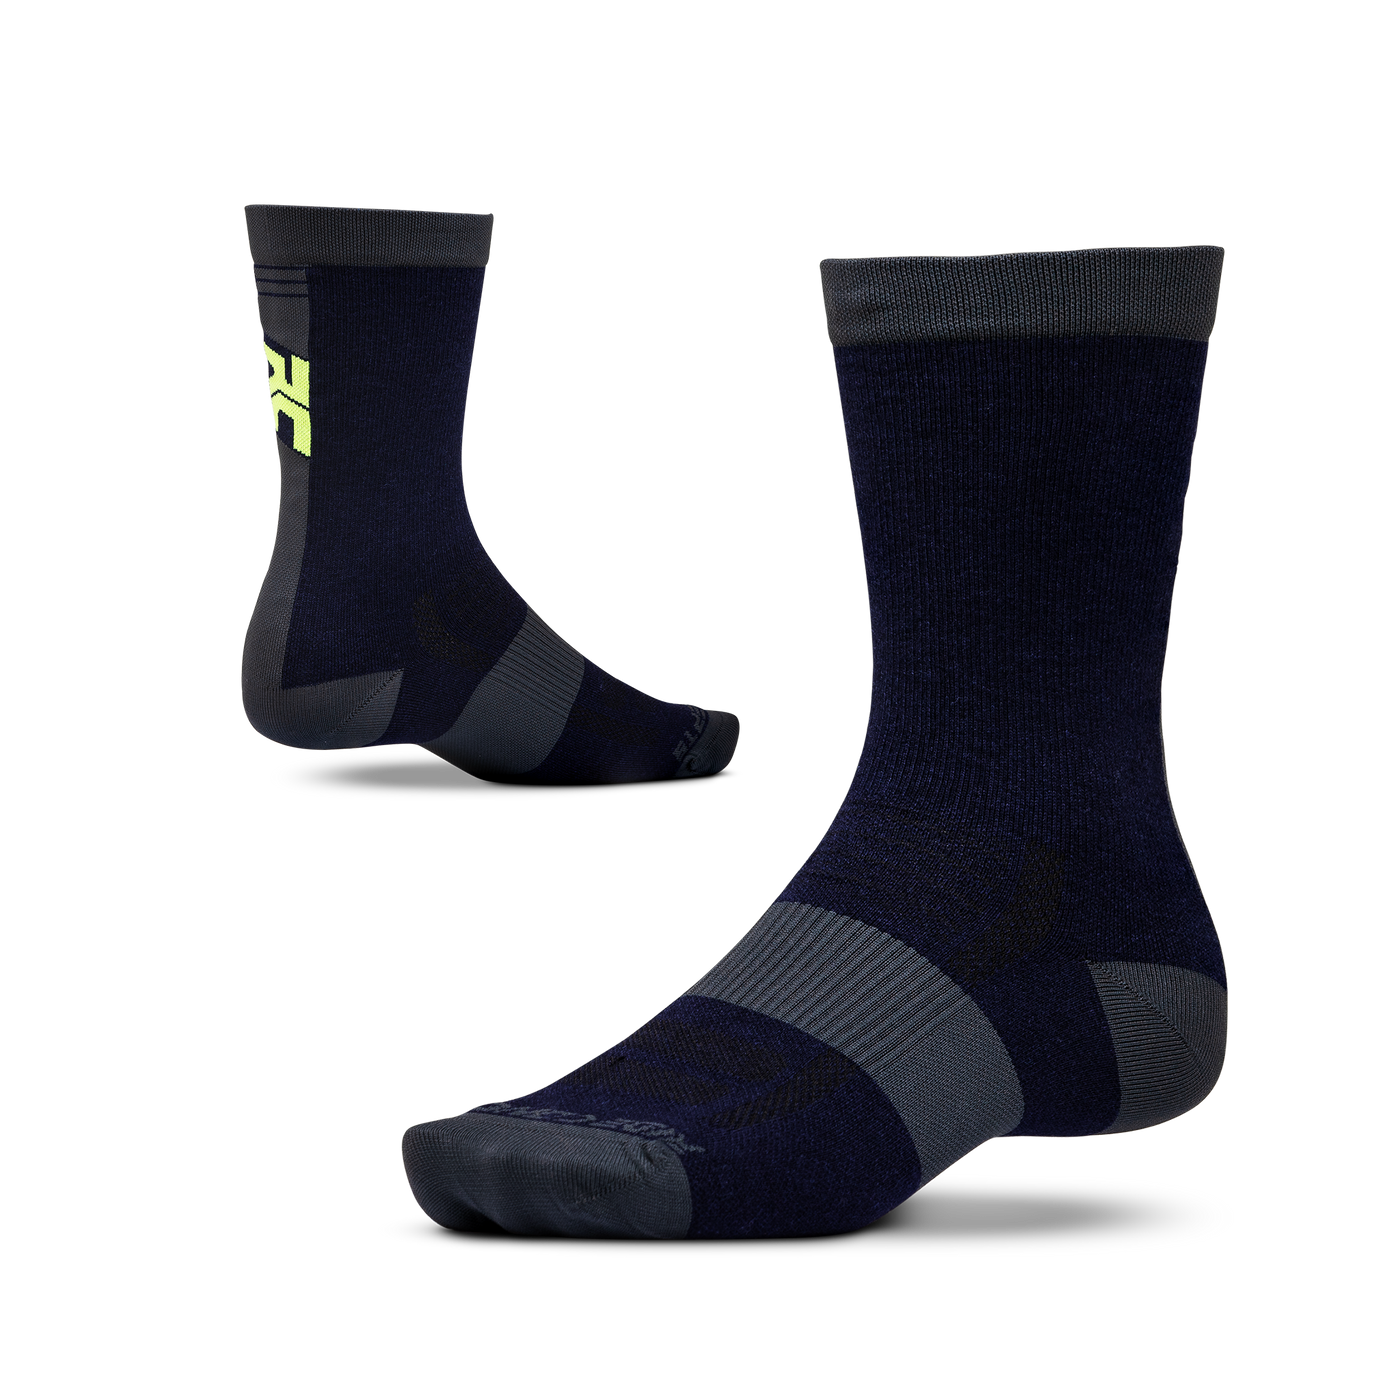 Ride Concepts Mullet MTB Sock - Wool 8" - Blue and Lime